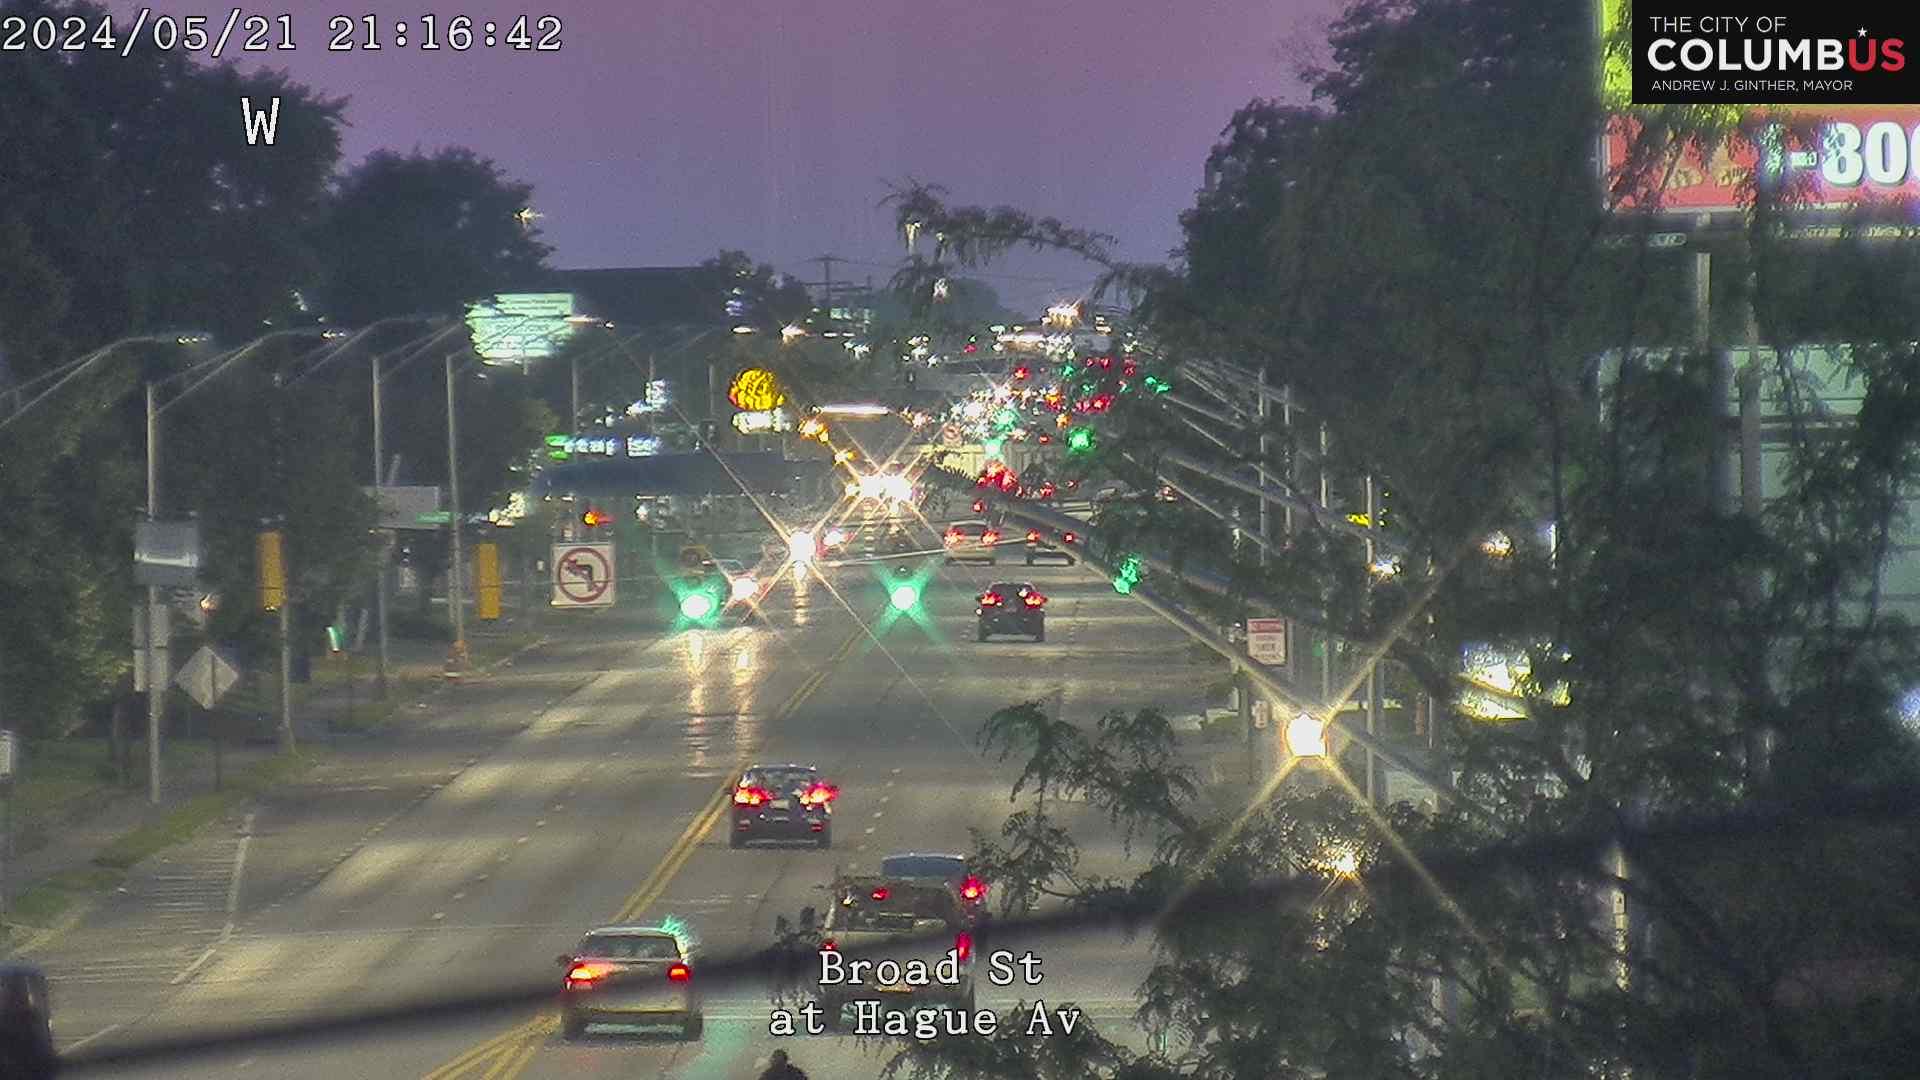 Traffic Cam Columbus: City of - Broad St at Hague Ave Player